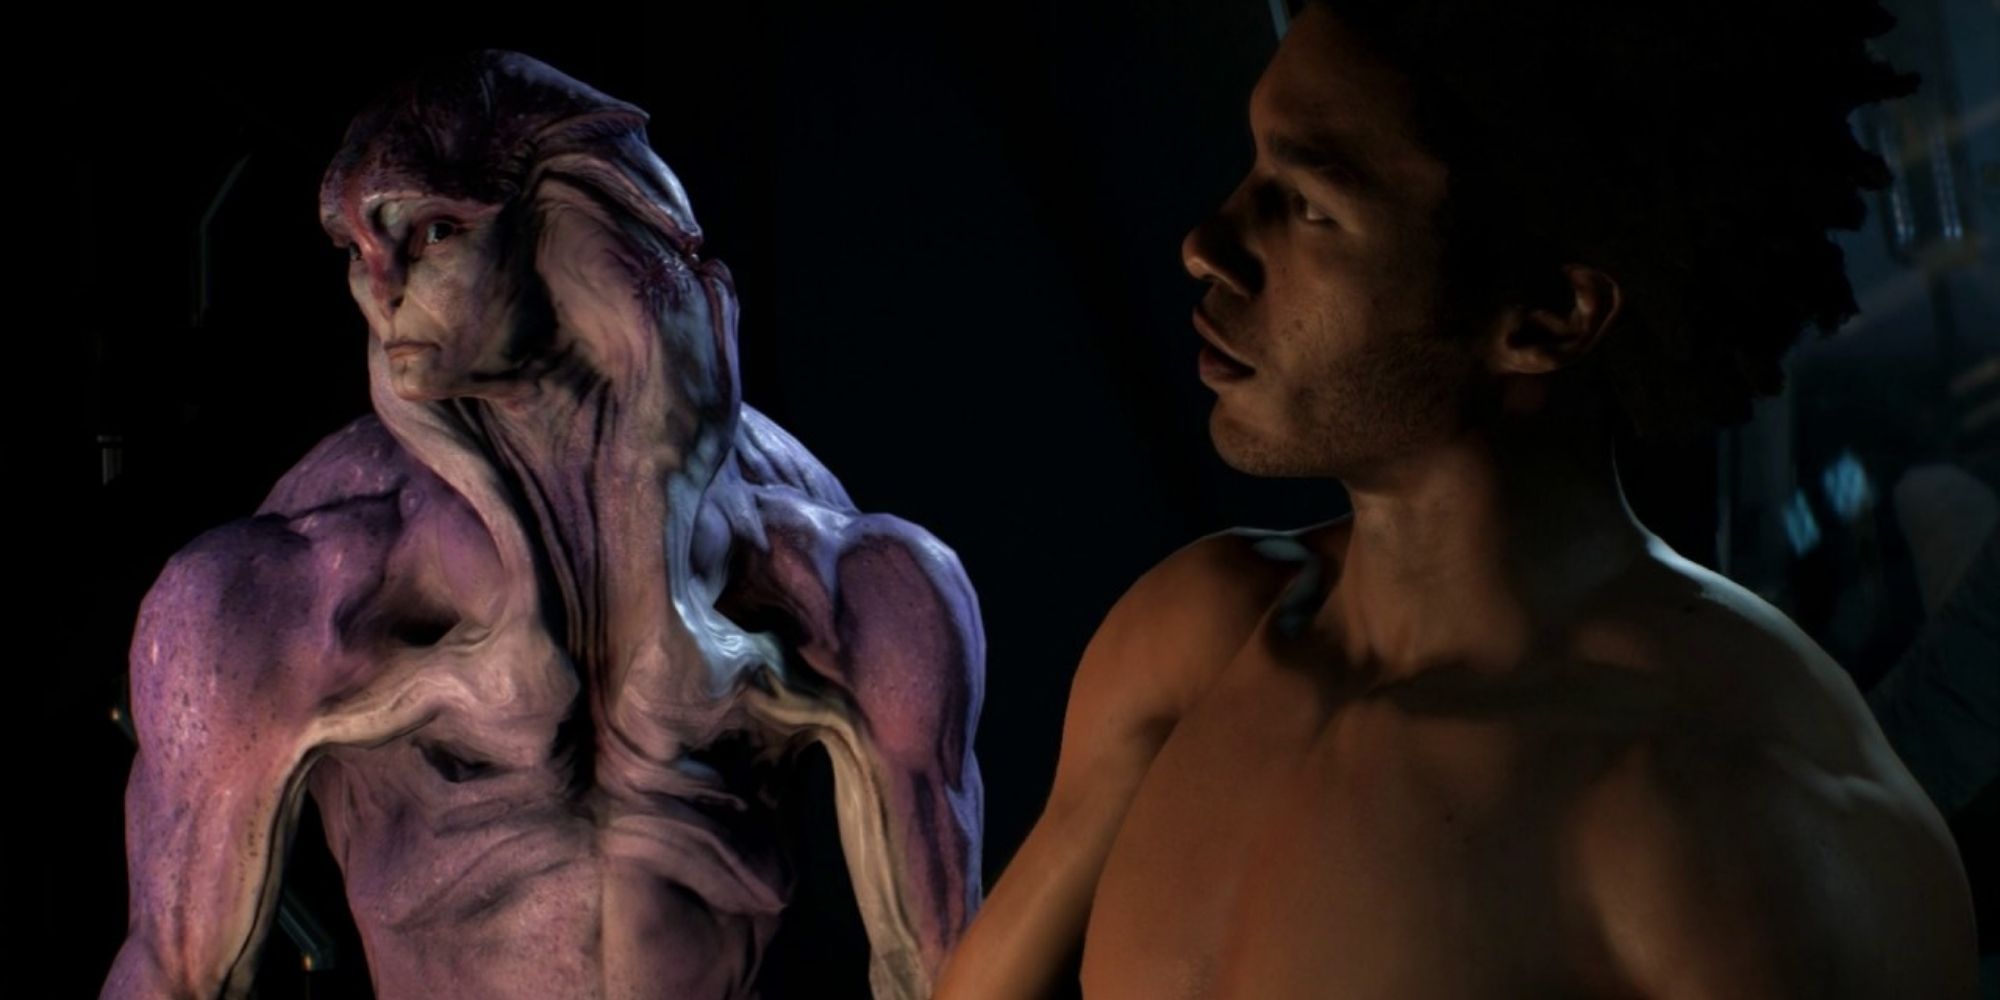 Mass Effect Andromeda - Liam and Jaal, both shirtless